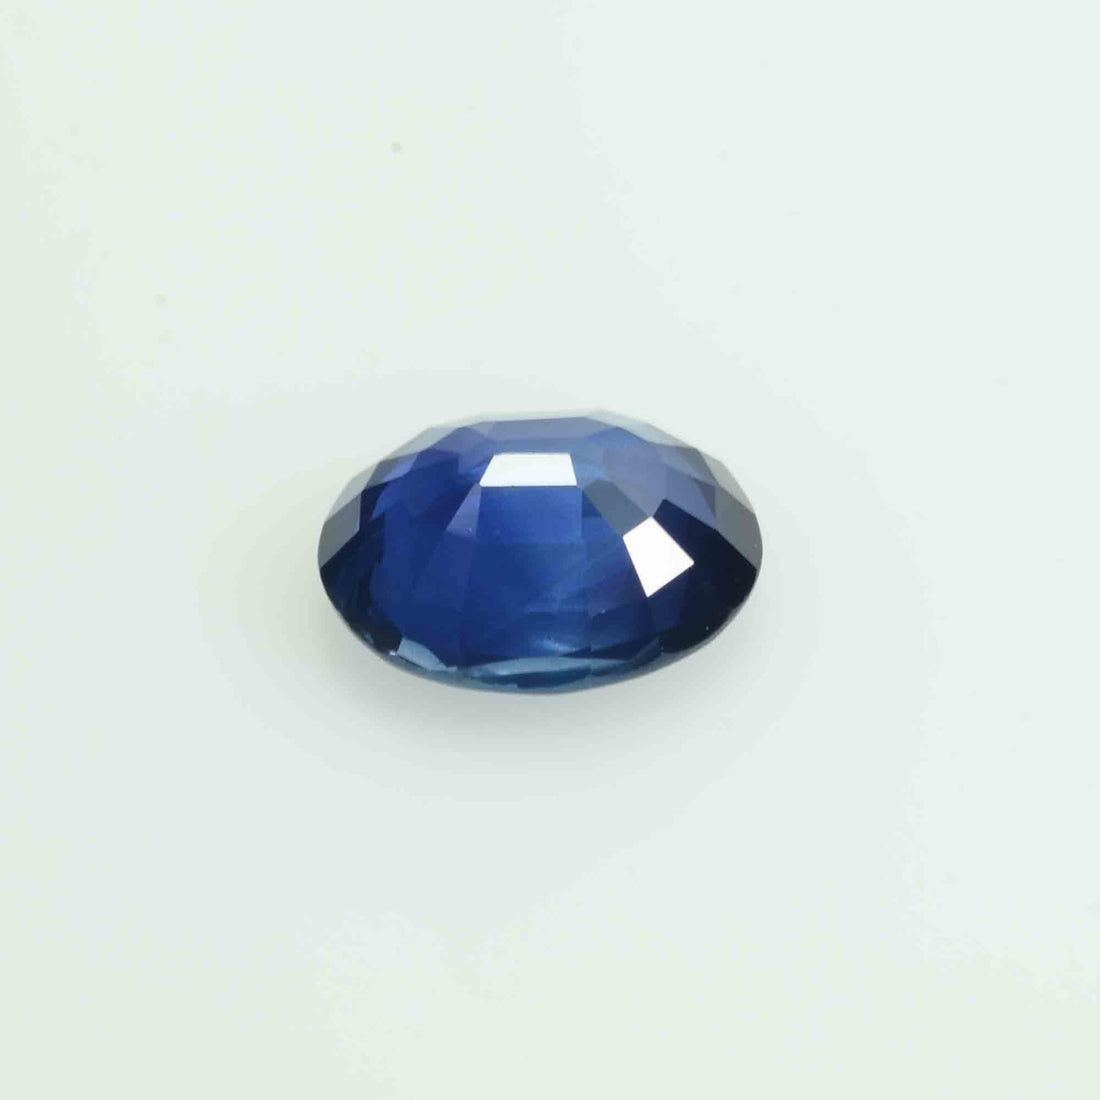 1.09 cts Natural Blue Sapphire Loose Gemstone Oval Cut